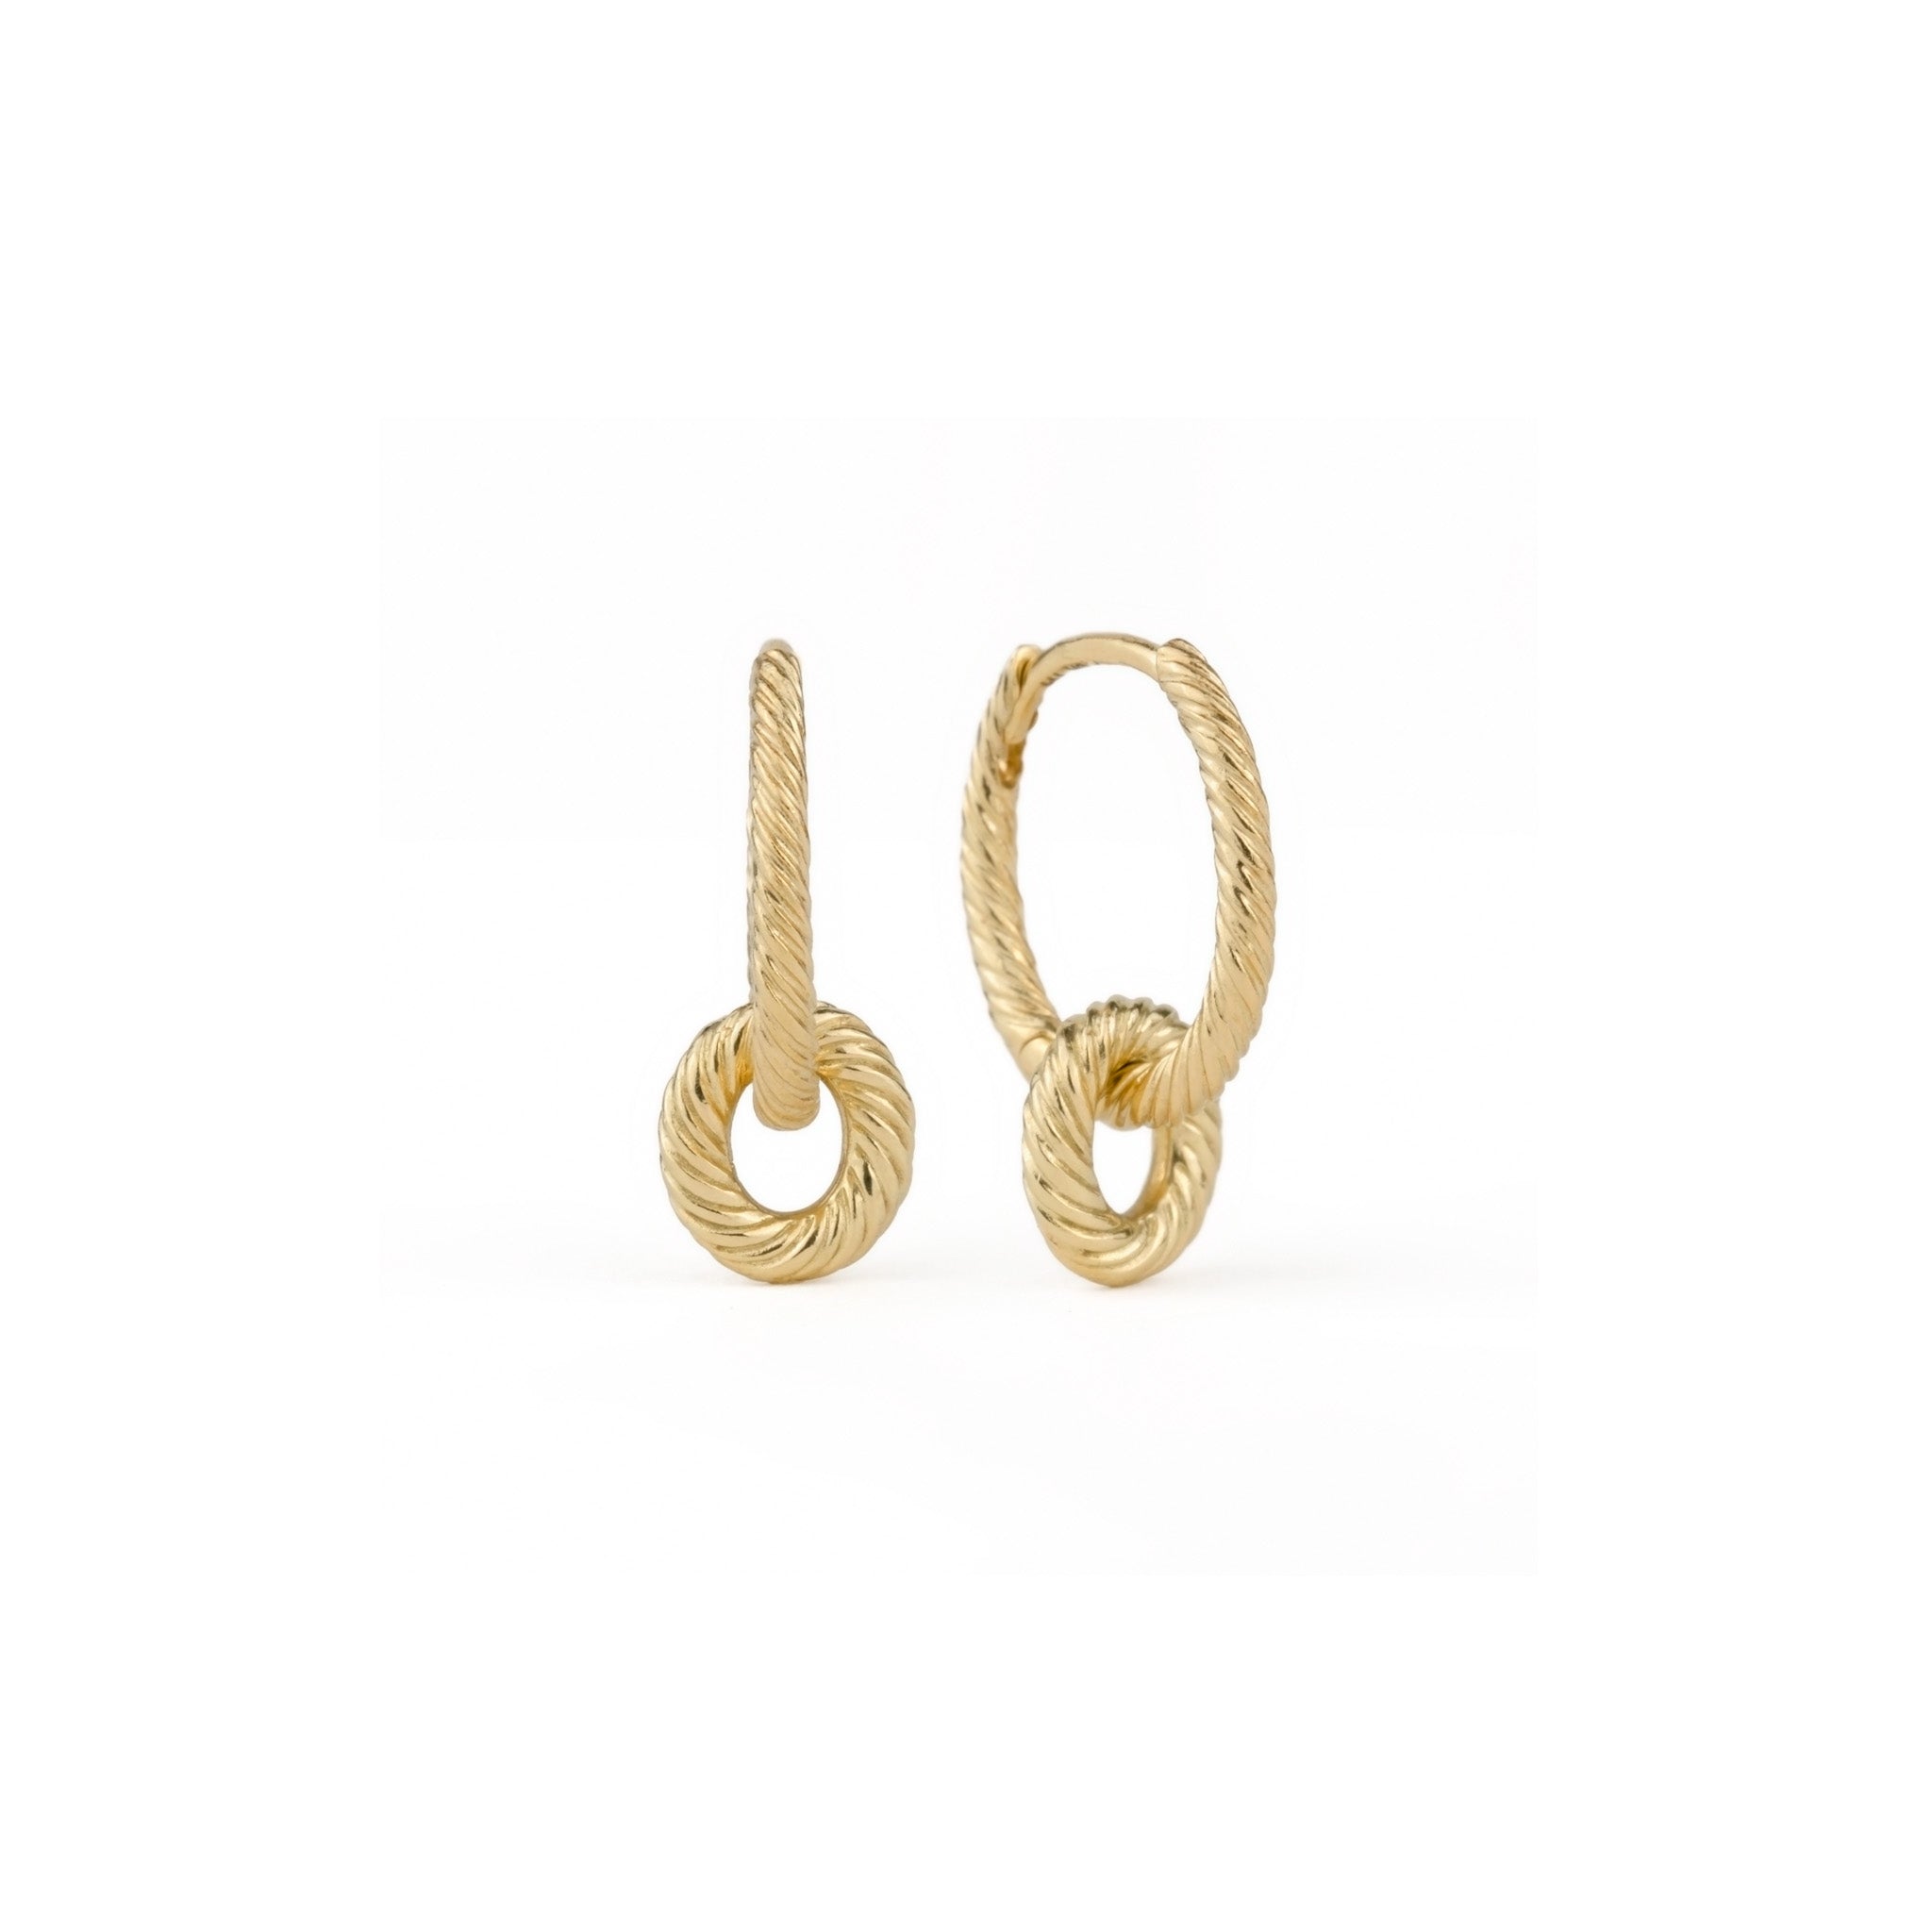 A pair of Banyan Hoops with Link Charms earrings from Aiden Jae.